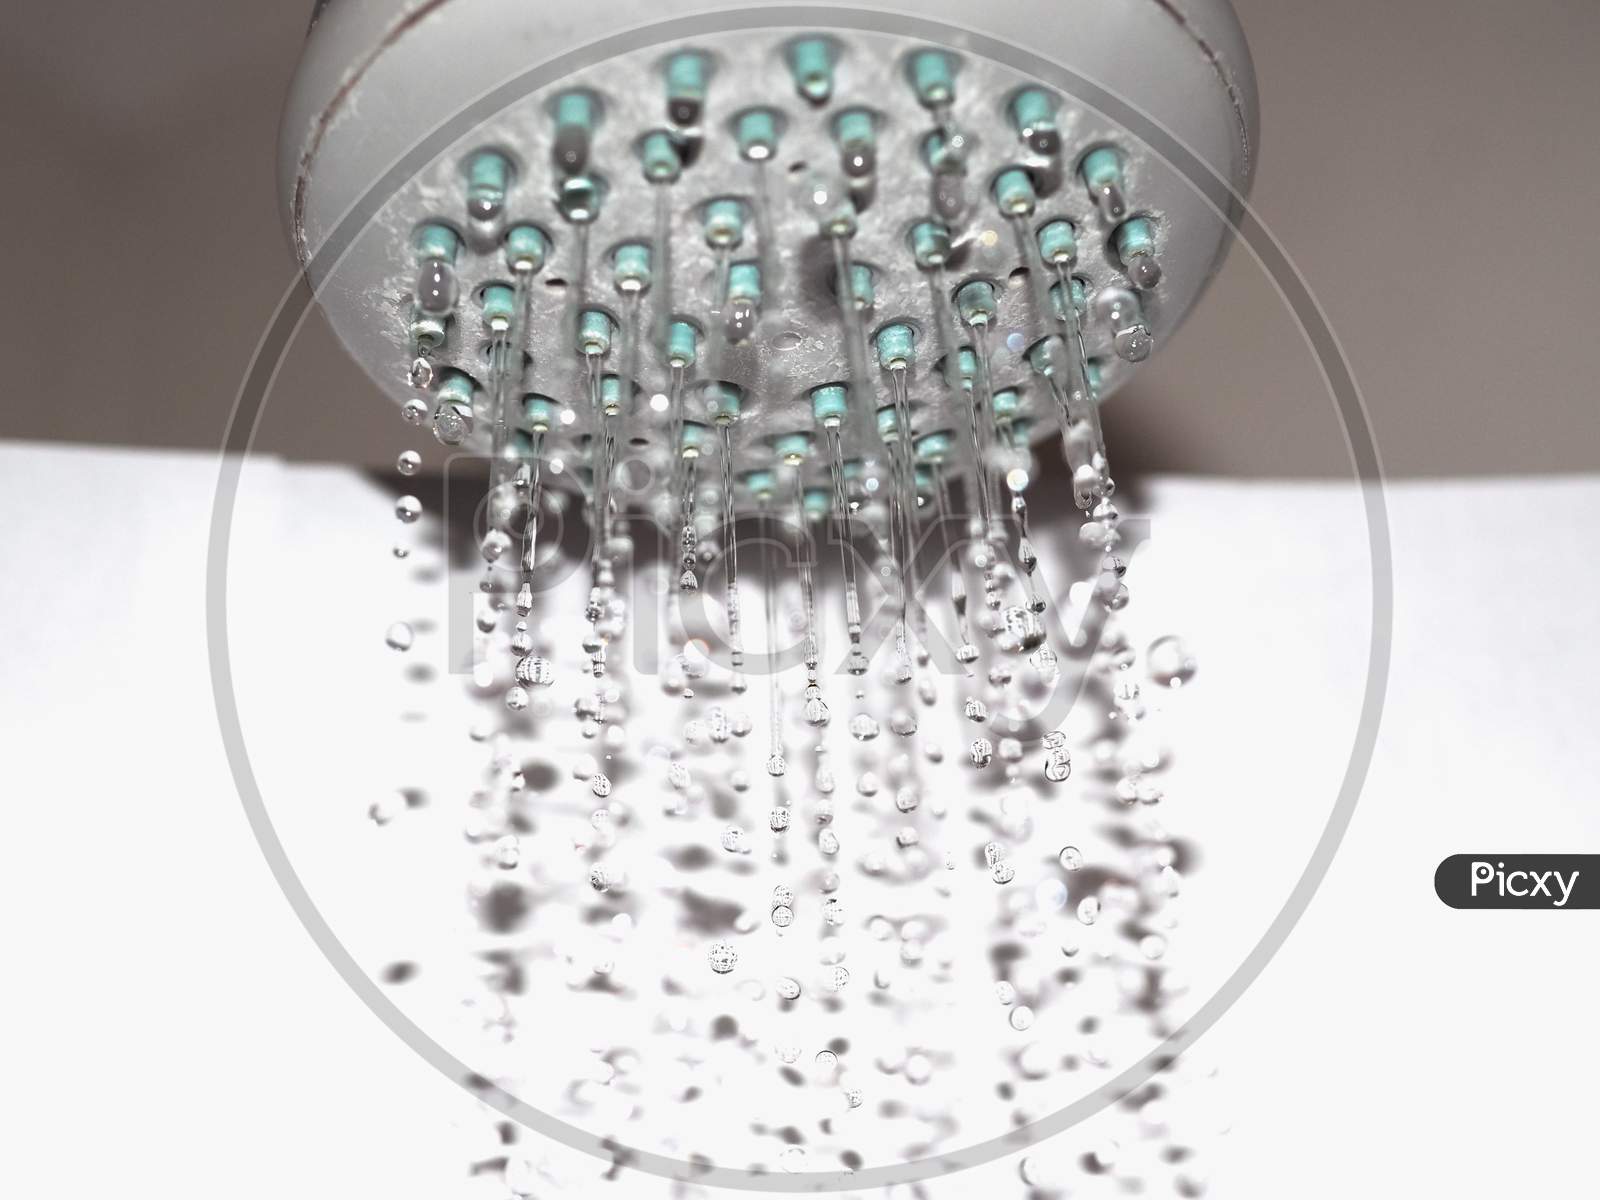 Drops Of Water From Shower Head